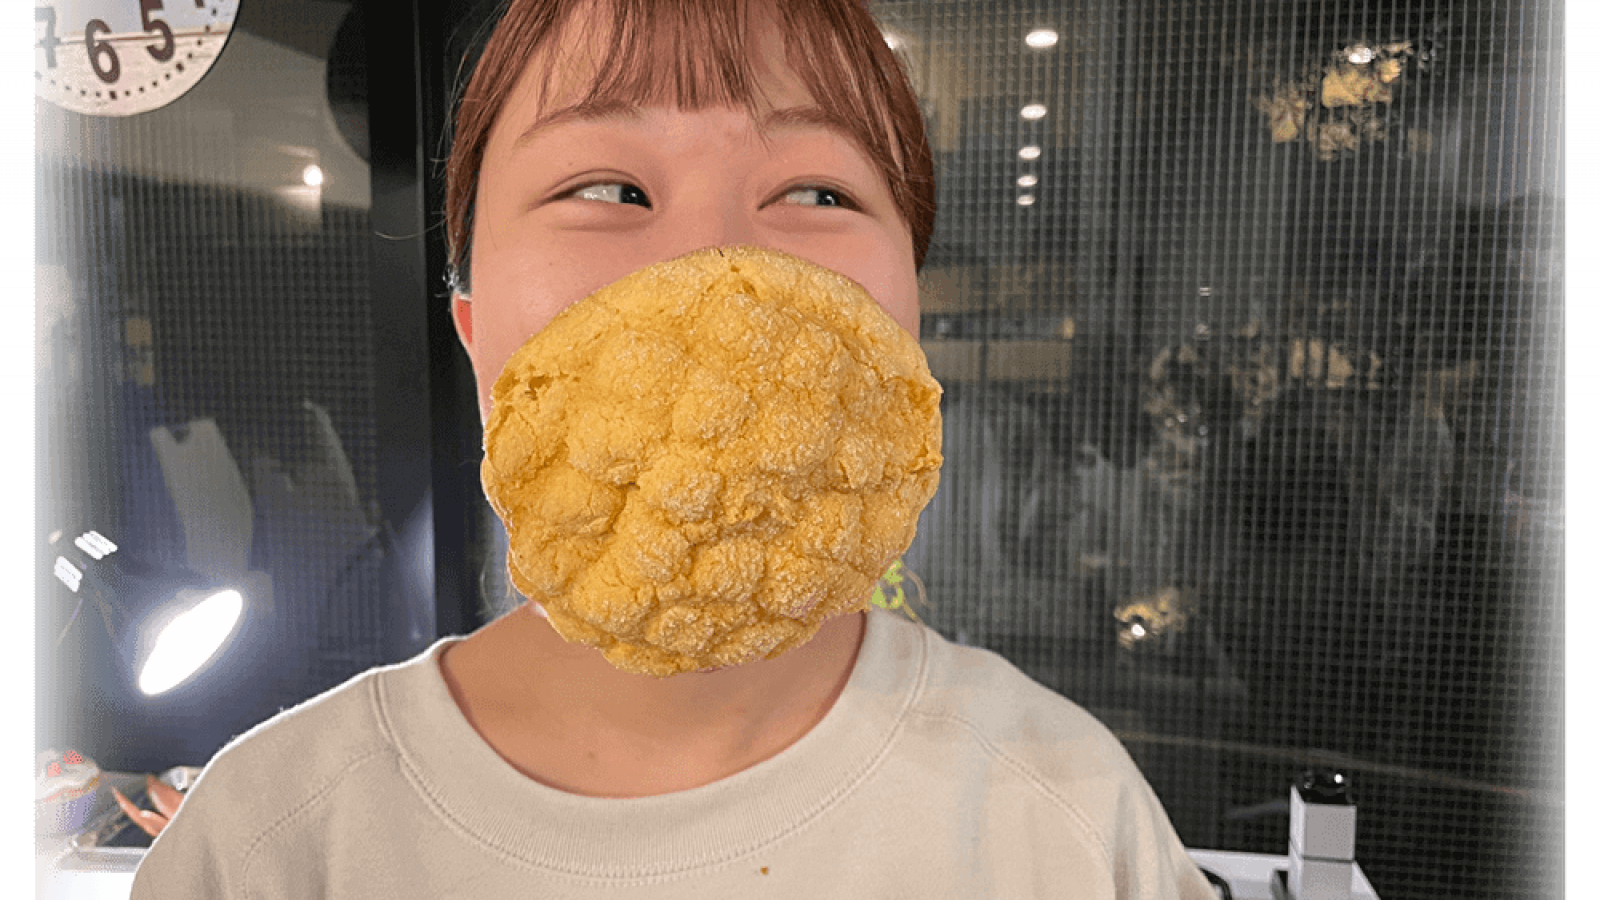 You Can Now Buy an Edible Face Mask Made Out of Bread